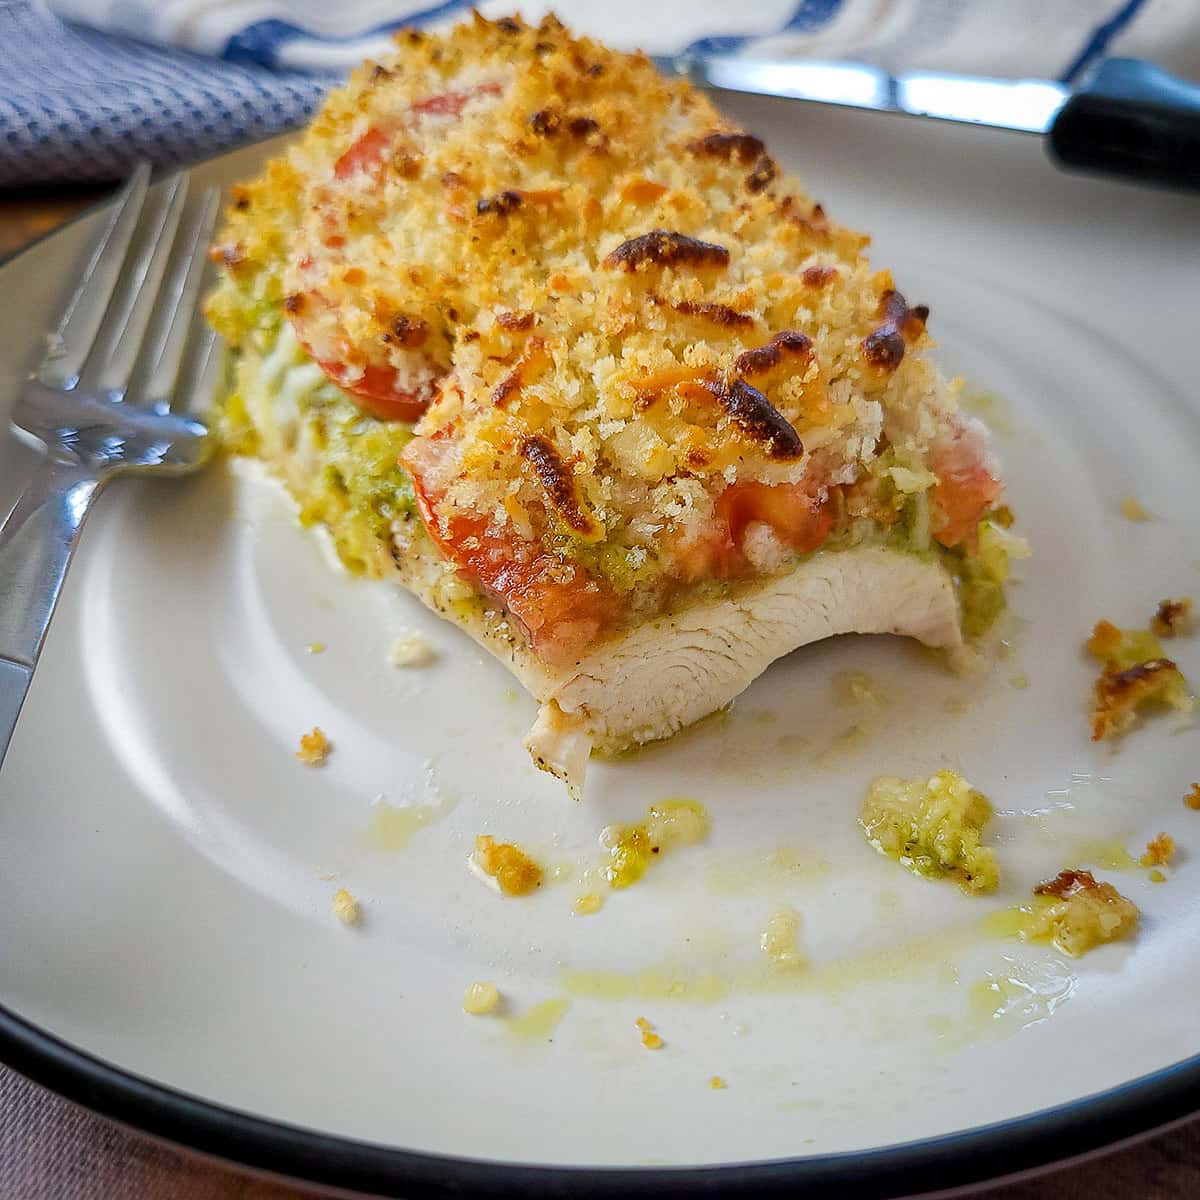 baked chicken breast with pesto, tomato and cheese on a plate